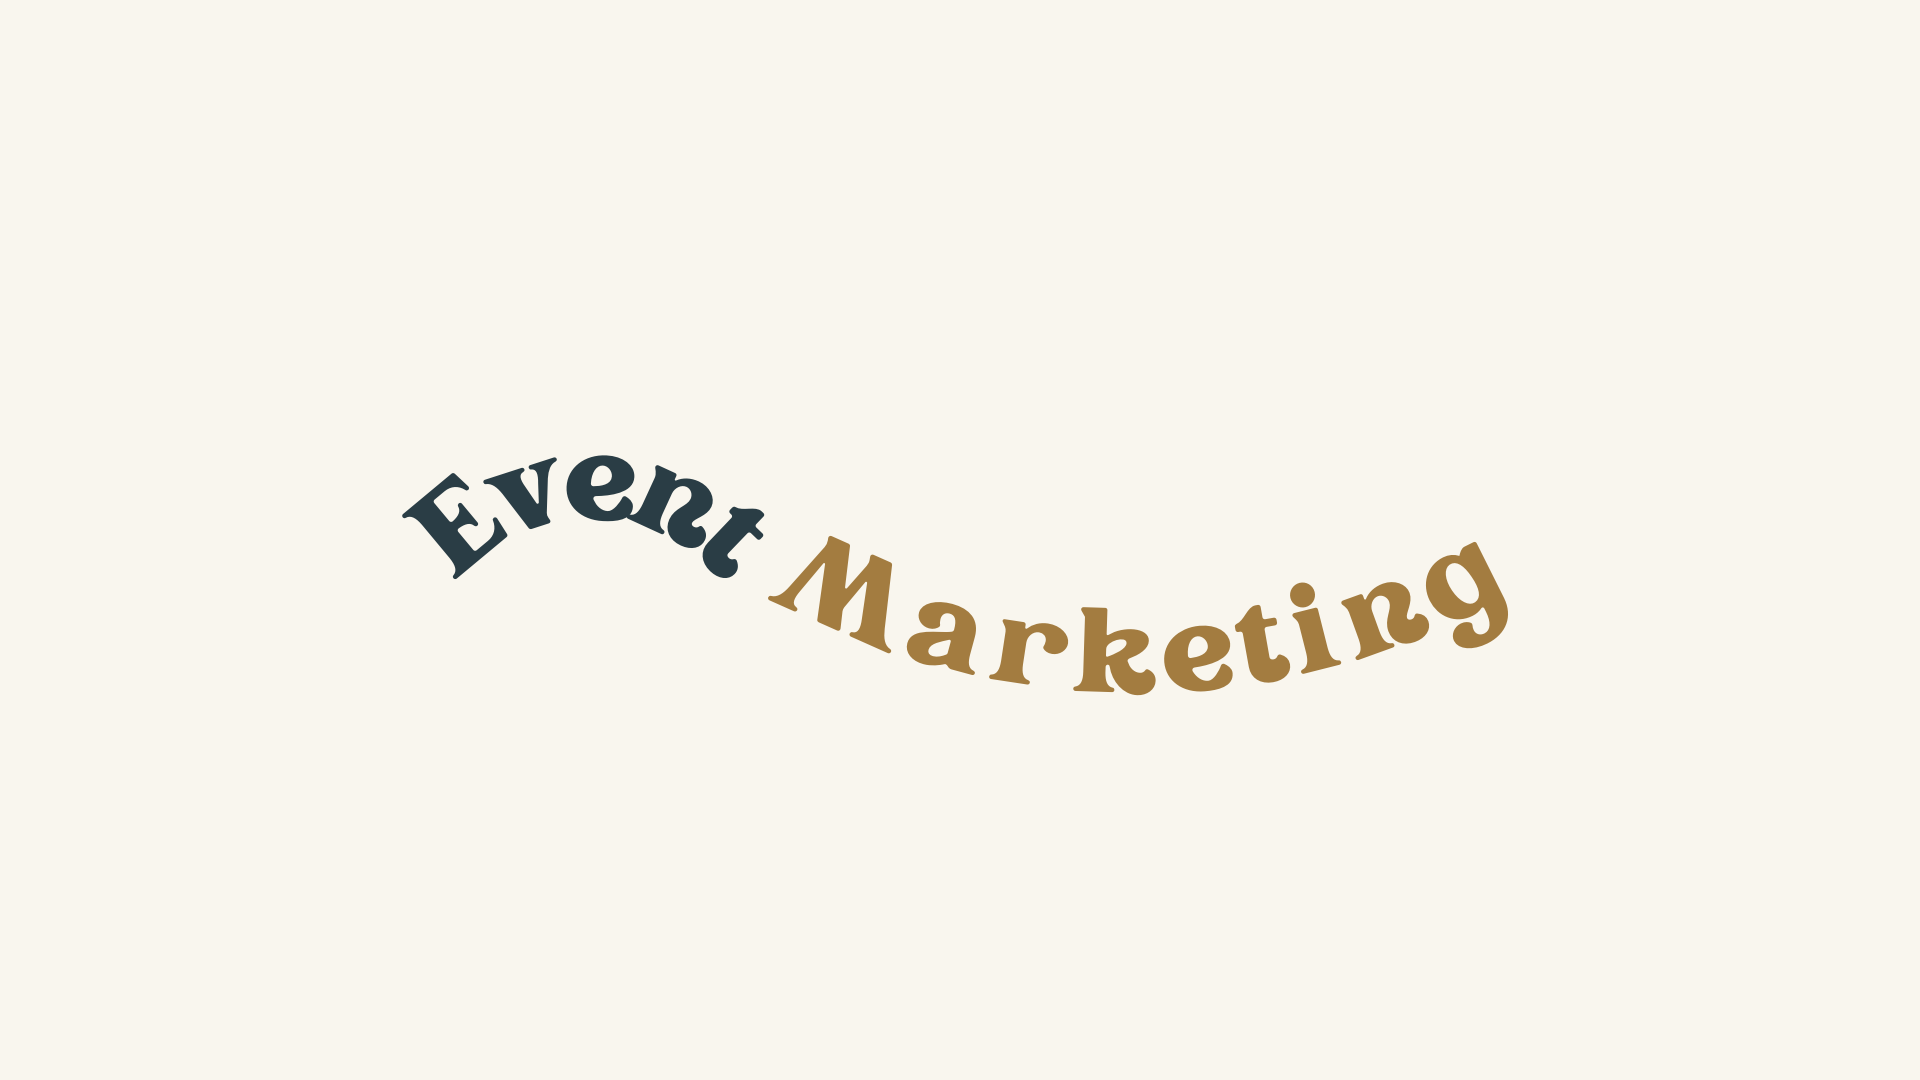 Attracting Your Perfect Audience with Event Marketing